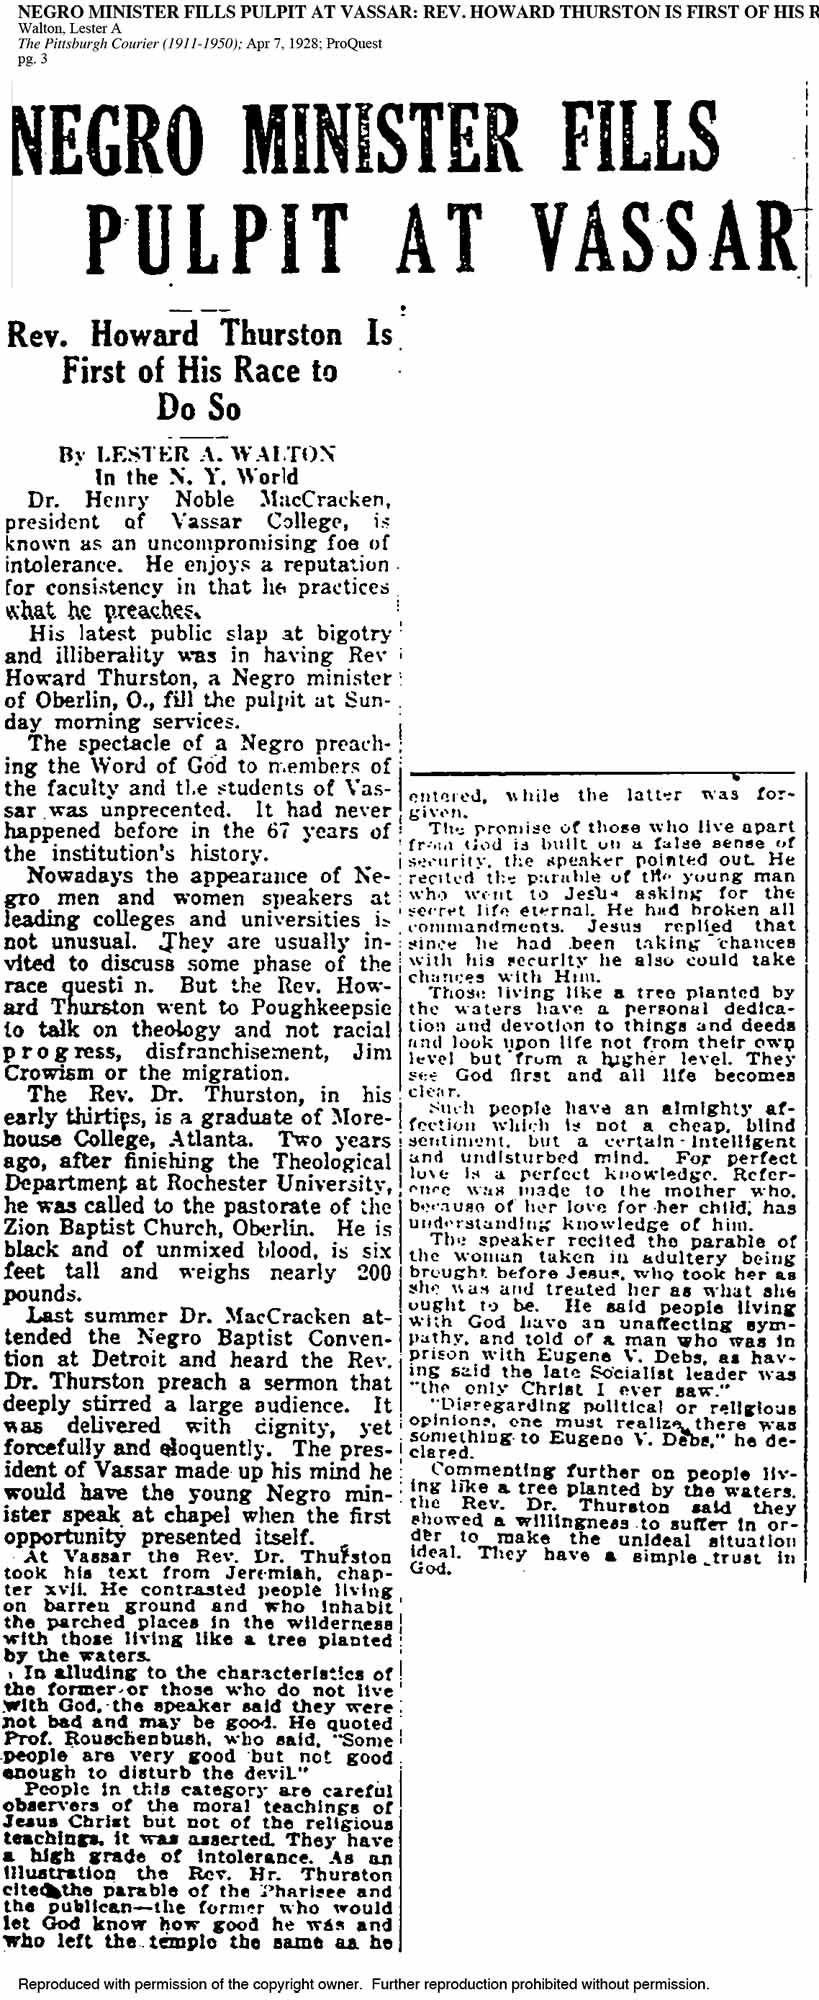 Original article scan for Negro Minister Fills Pulpit at Vassar: Rev. Howard Thurston is First of His Race to Do So; Walton, Lester A; The Pittsburgh Courier (1911-1950); Apr 7, 1928; ProQuest pg. 3